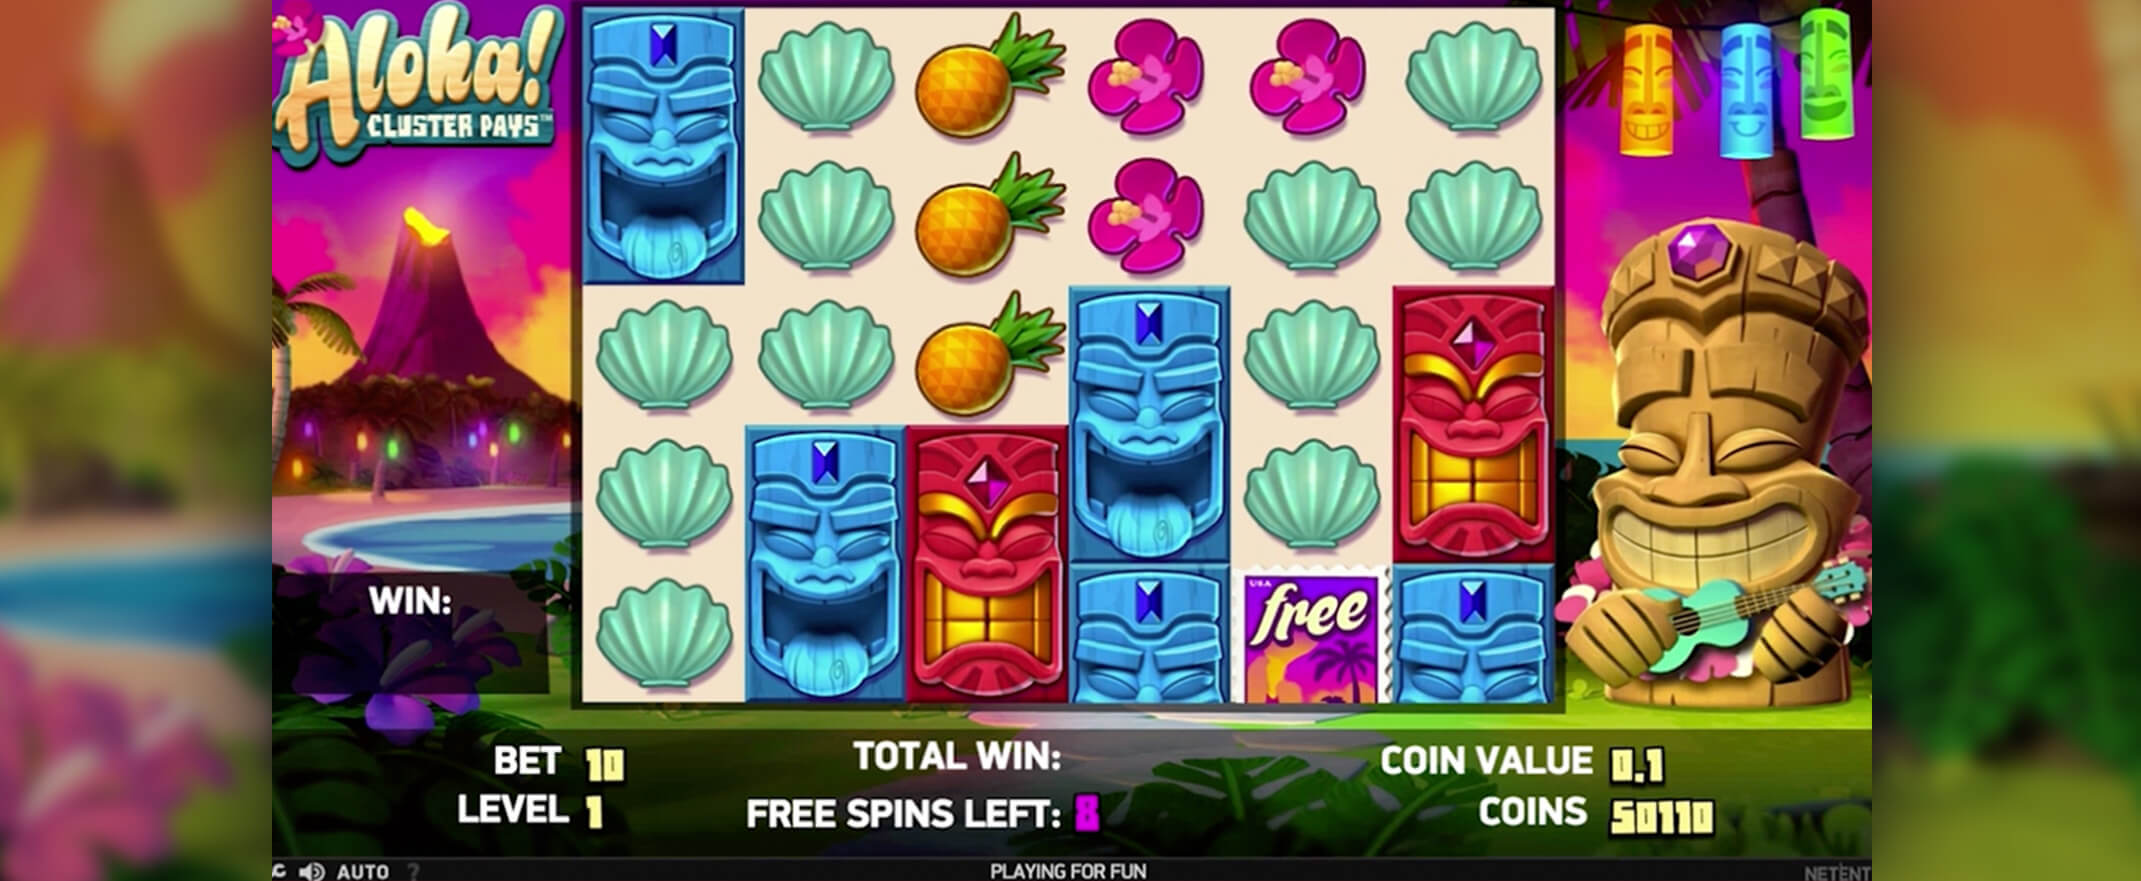 Aloha! Cluster Pays Slot Review, image of the reels and symbols